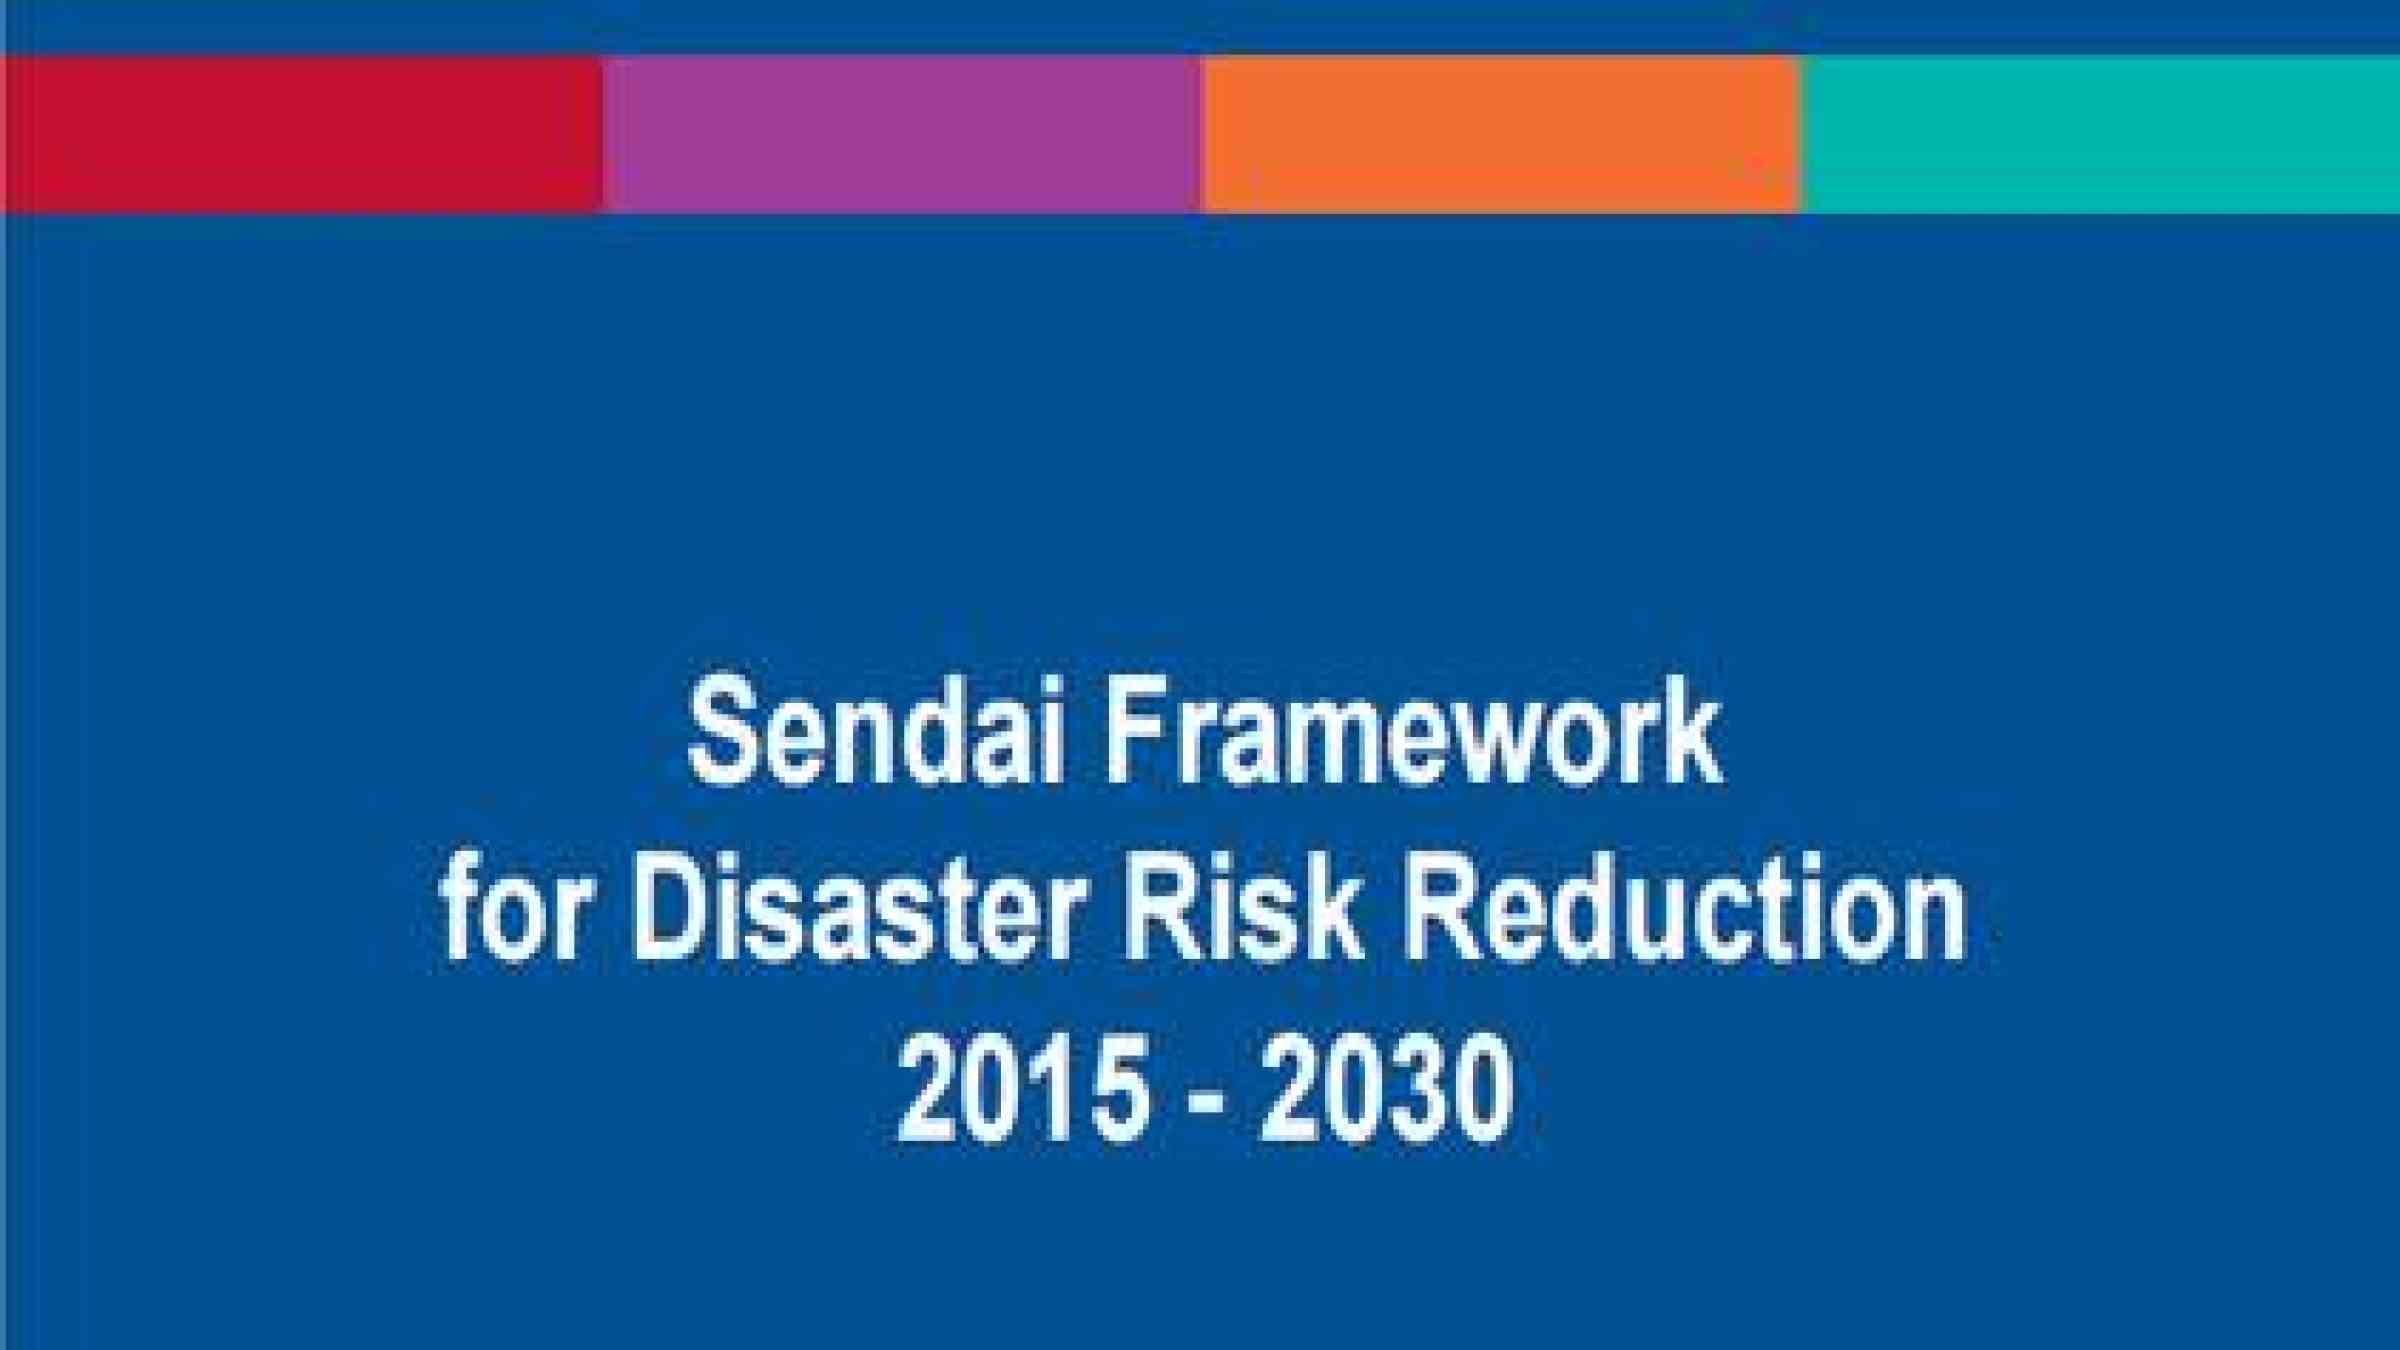 The Words into Action process will energize implementation of the Sendai Framework (Photo: UNISDR)